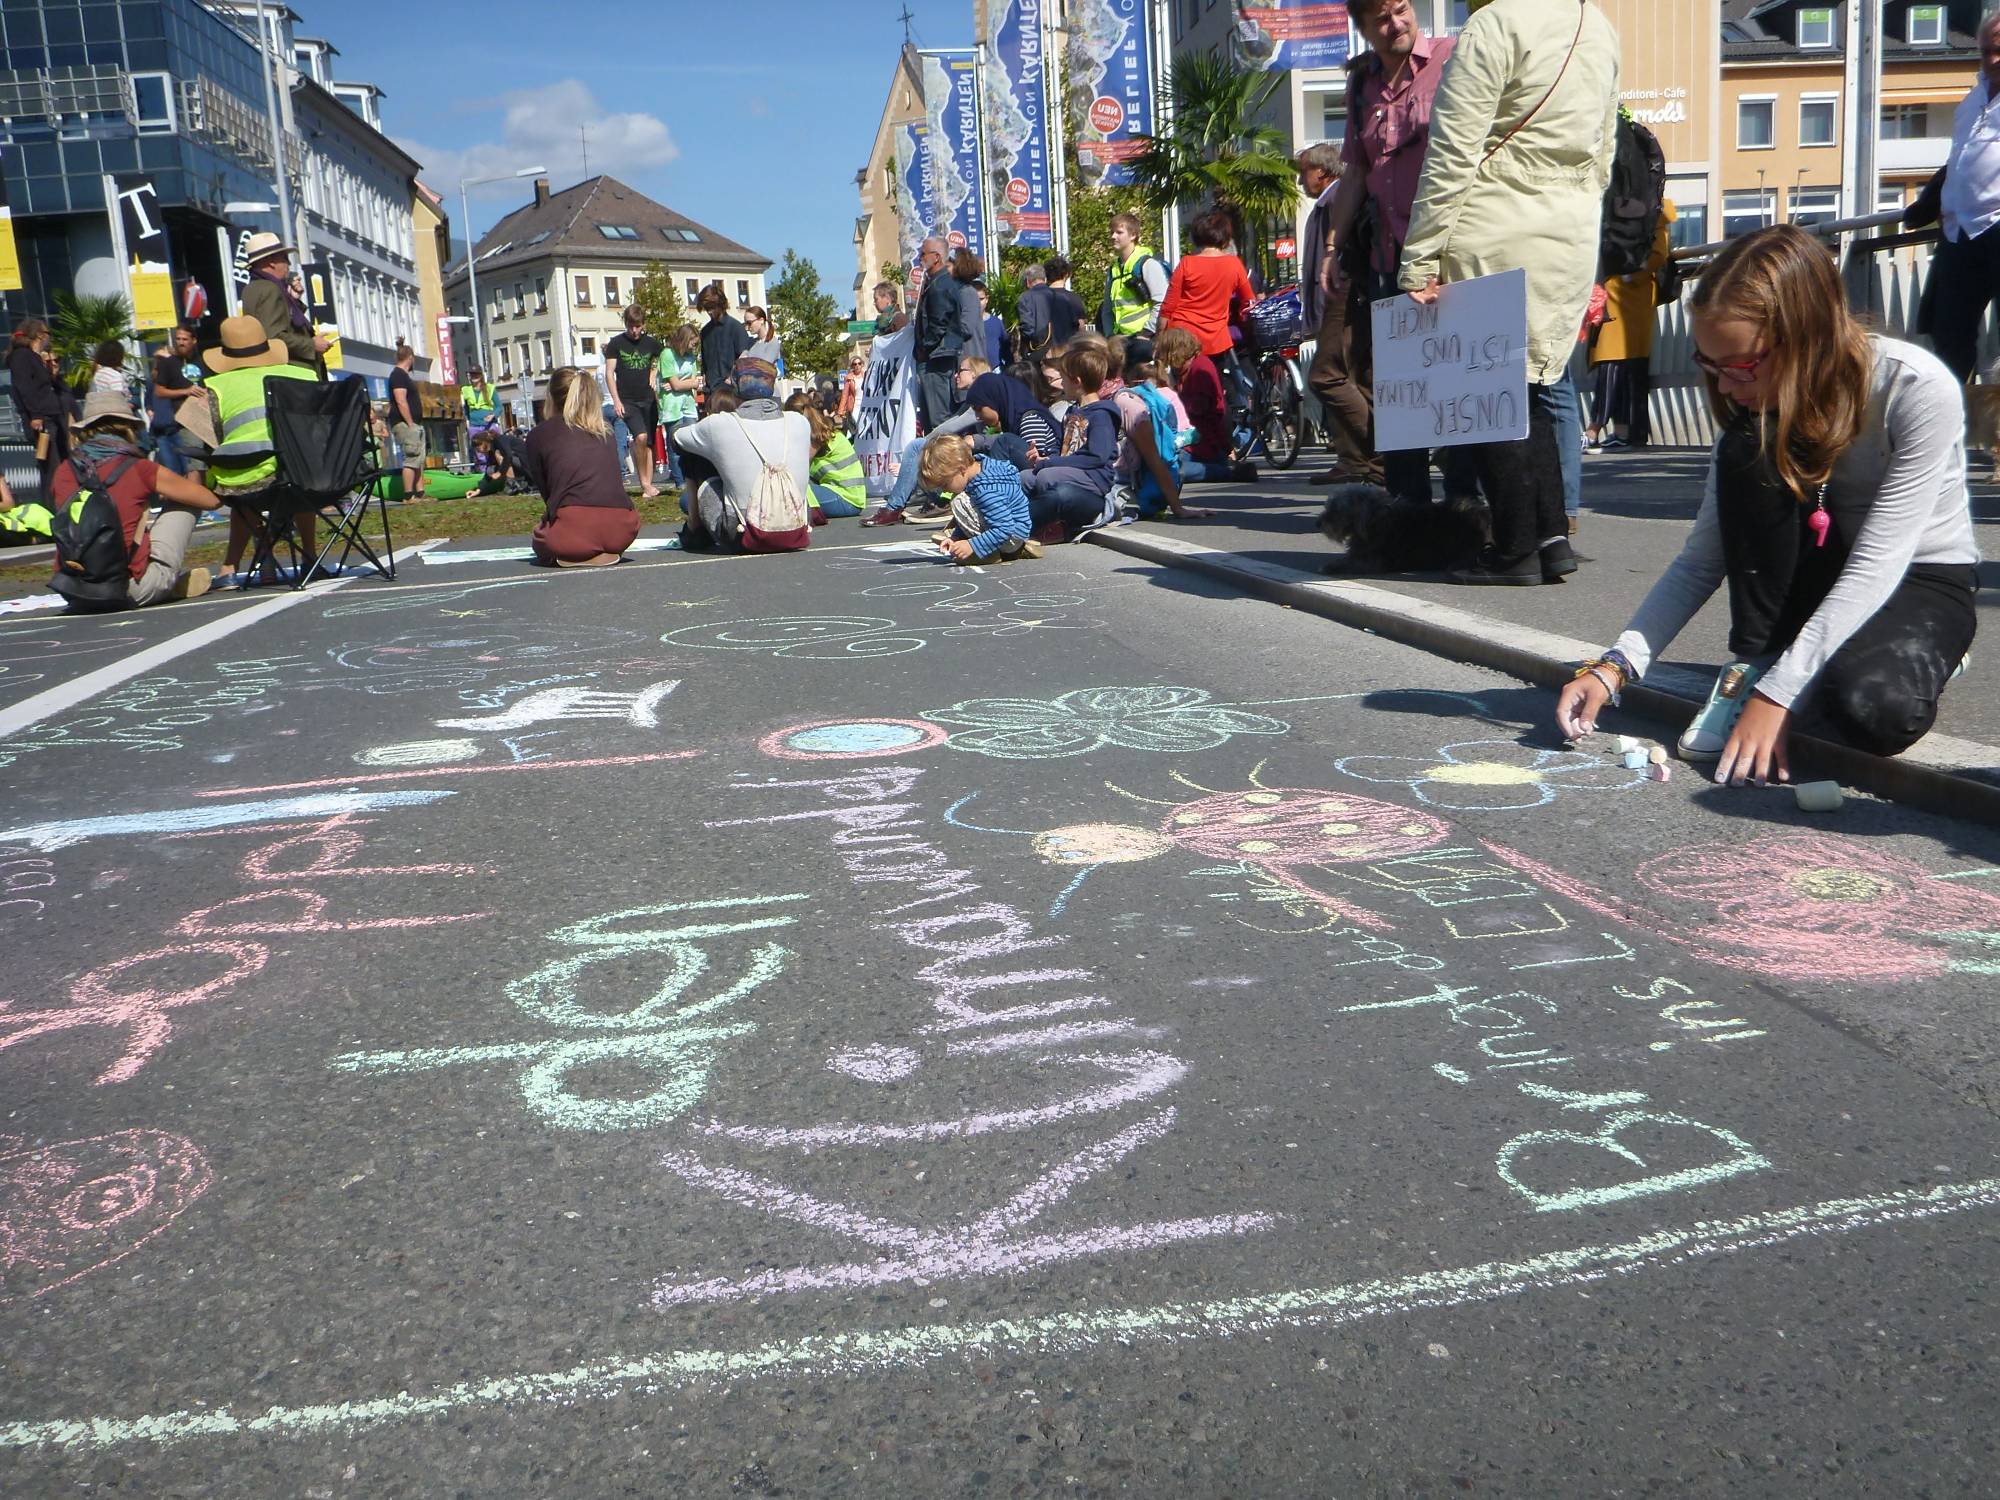 Fridays for Future on 2019-09-20 in Villach, Carinthia, Photo #10